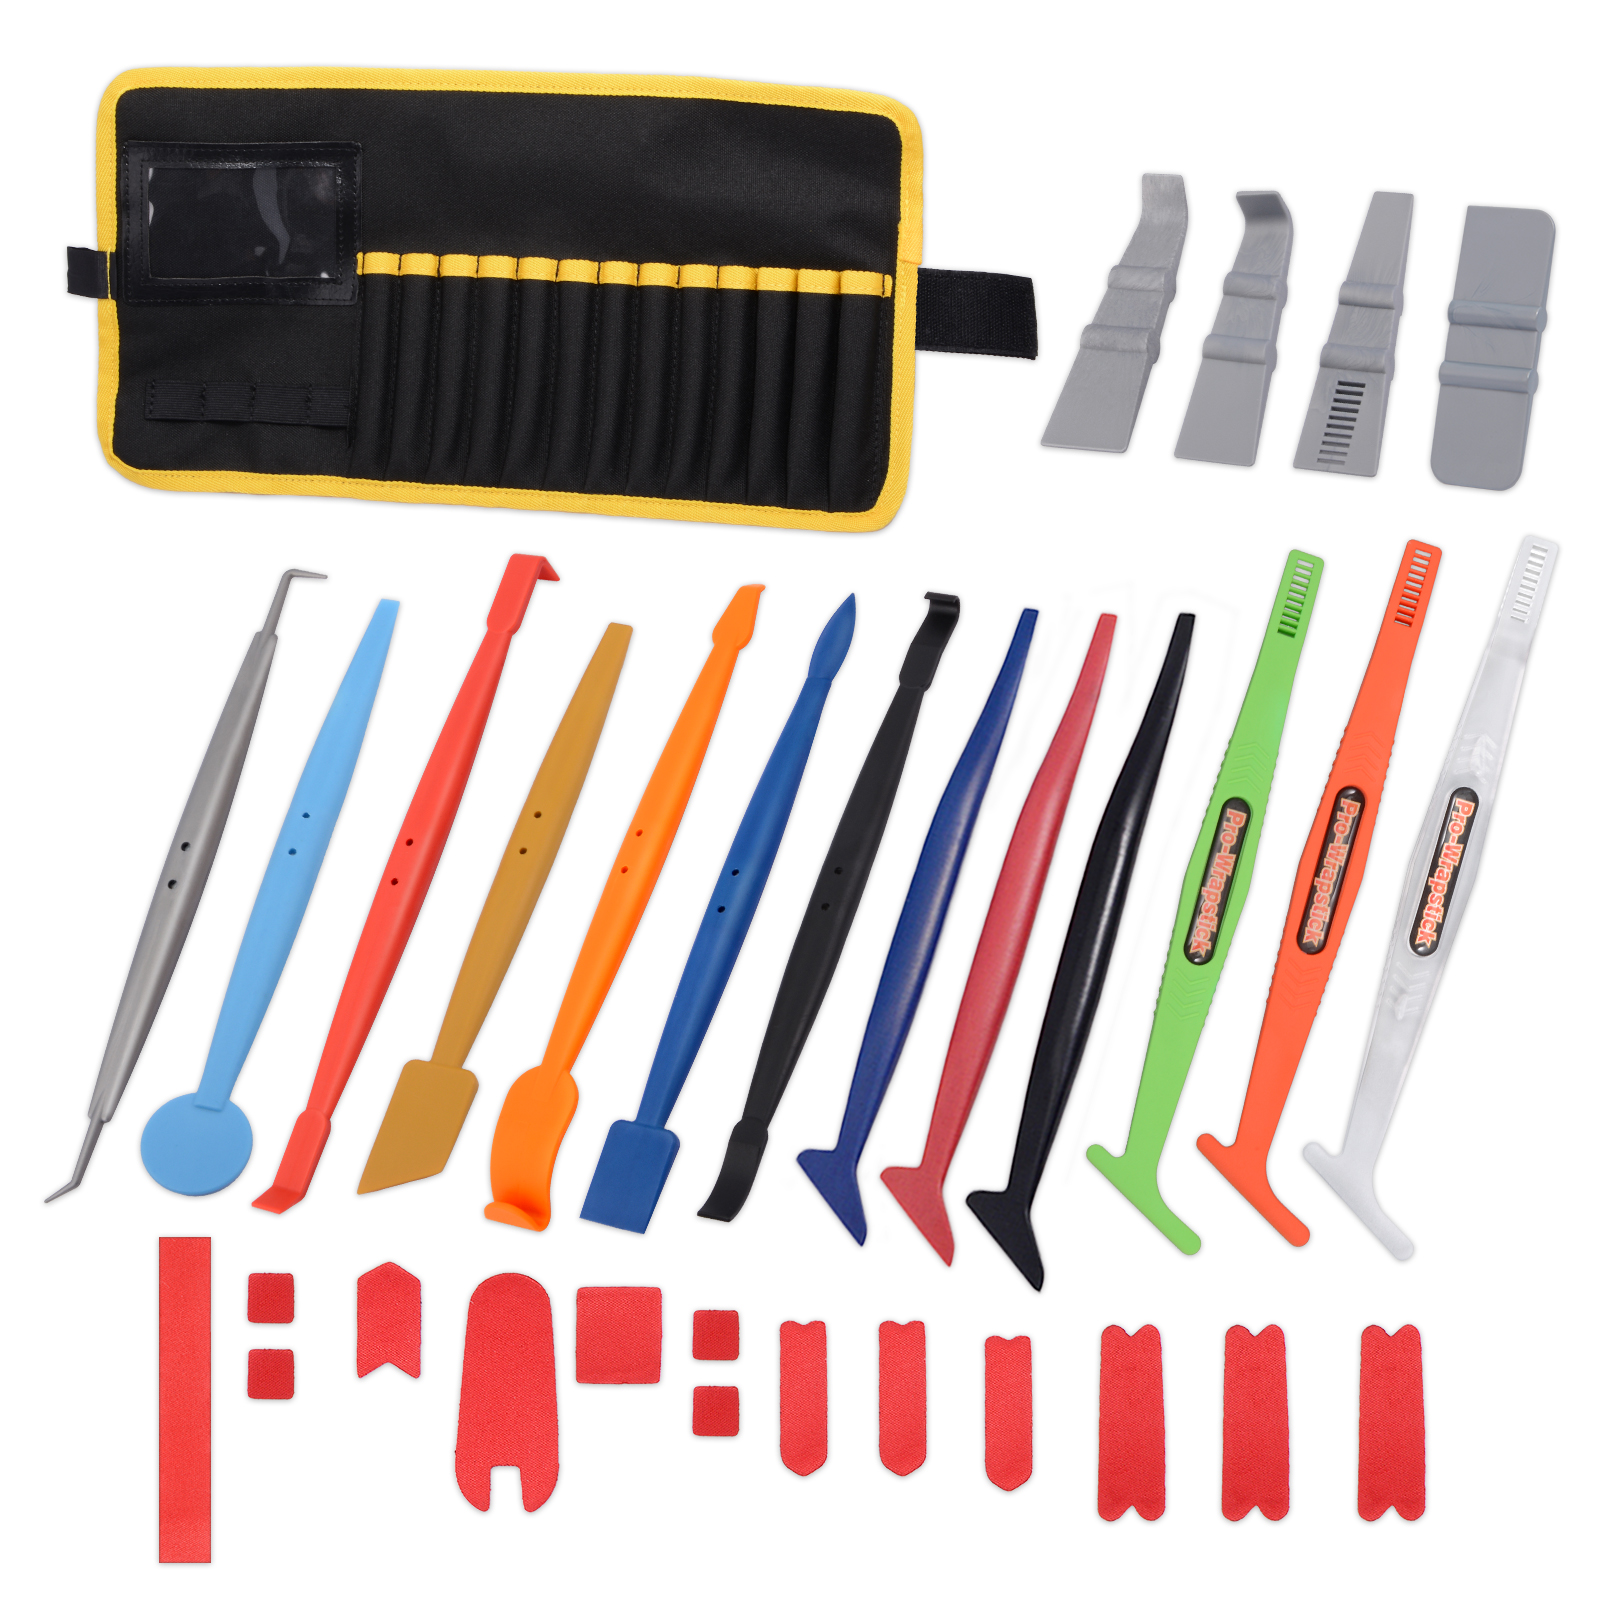 18 in 1 Mutli Purpose Squeegee Set, with Squeegee, Tucking, Wrapping Tools, Felt and a Carrying Case